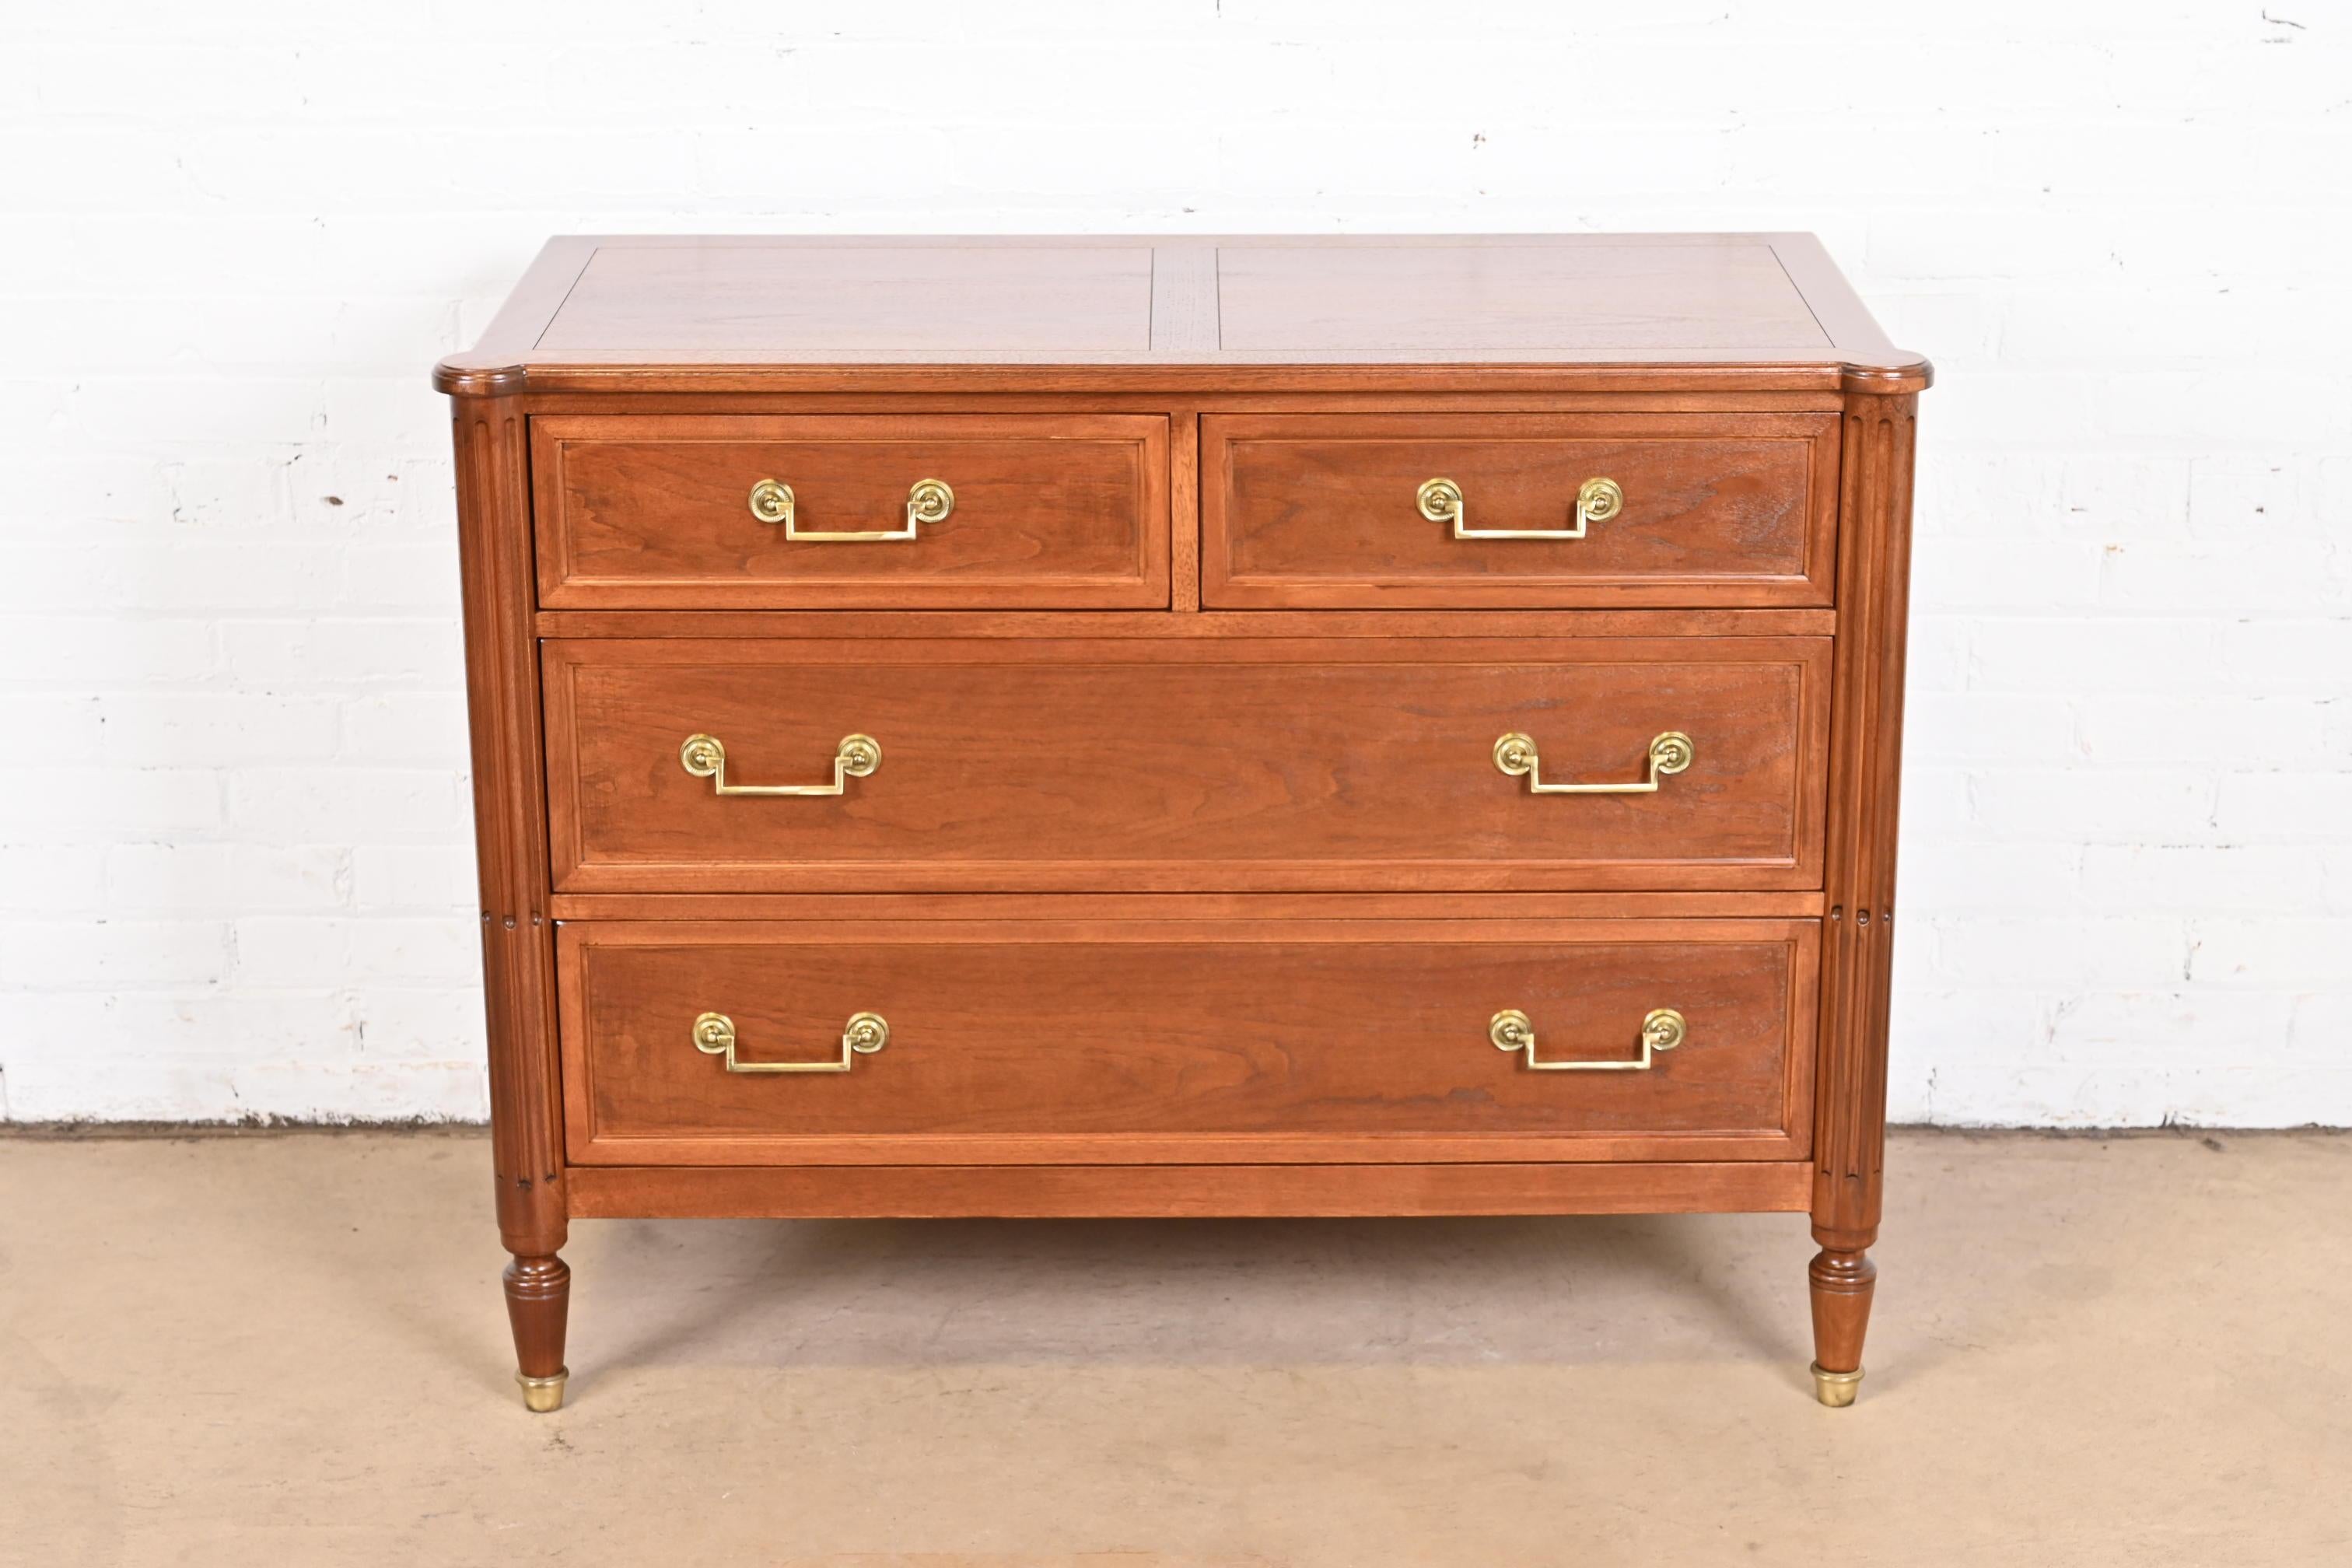 A gorgeous French Regency Louis XVI style dresser or chest of drawers

By Baker Furniture, 